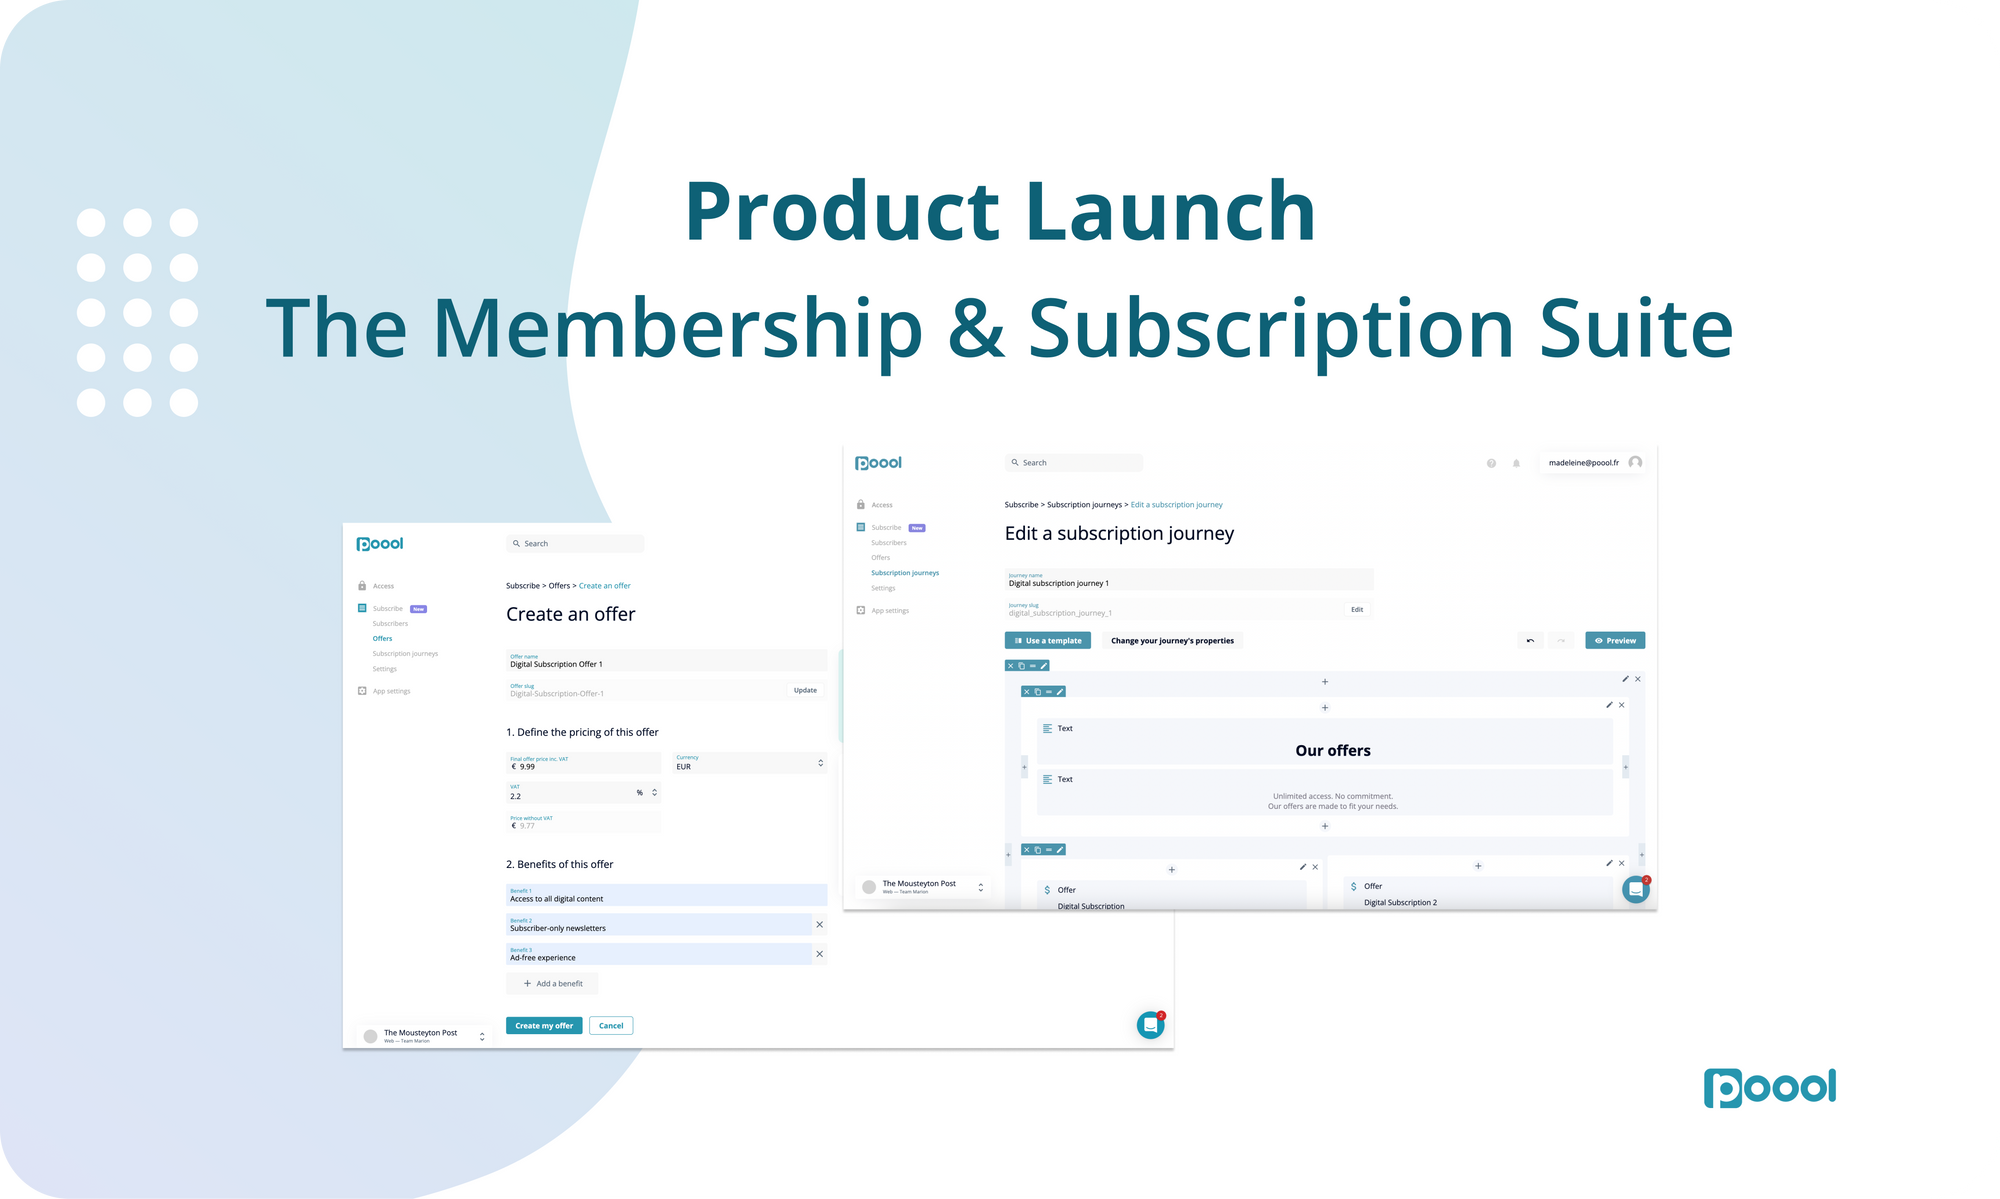 Product launch: The Membership & Subscription Suite